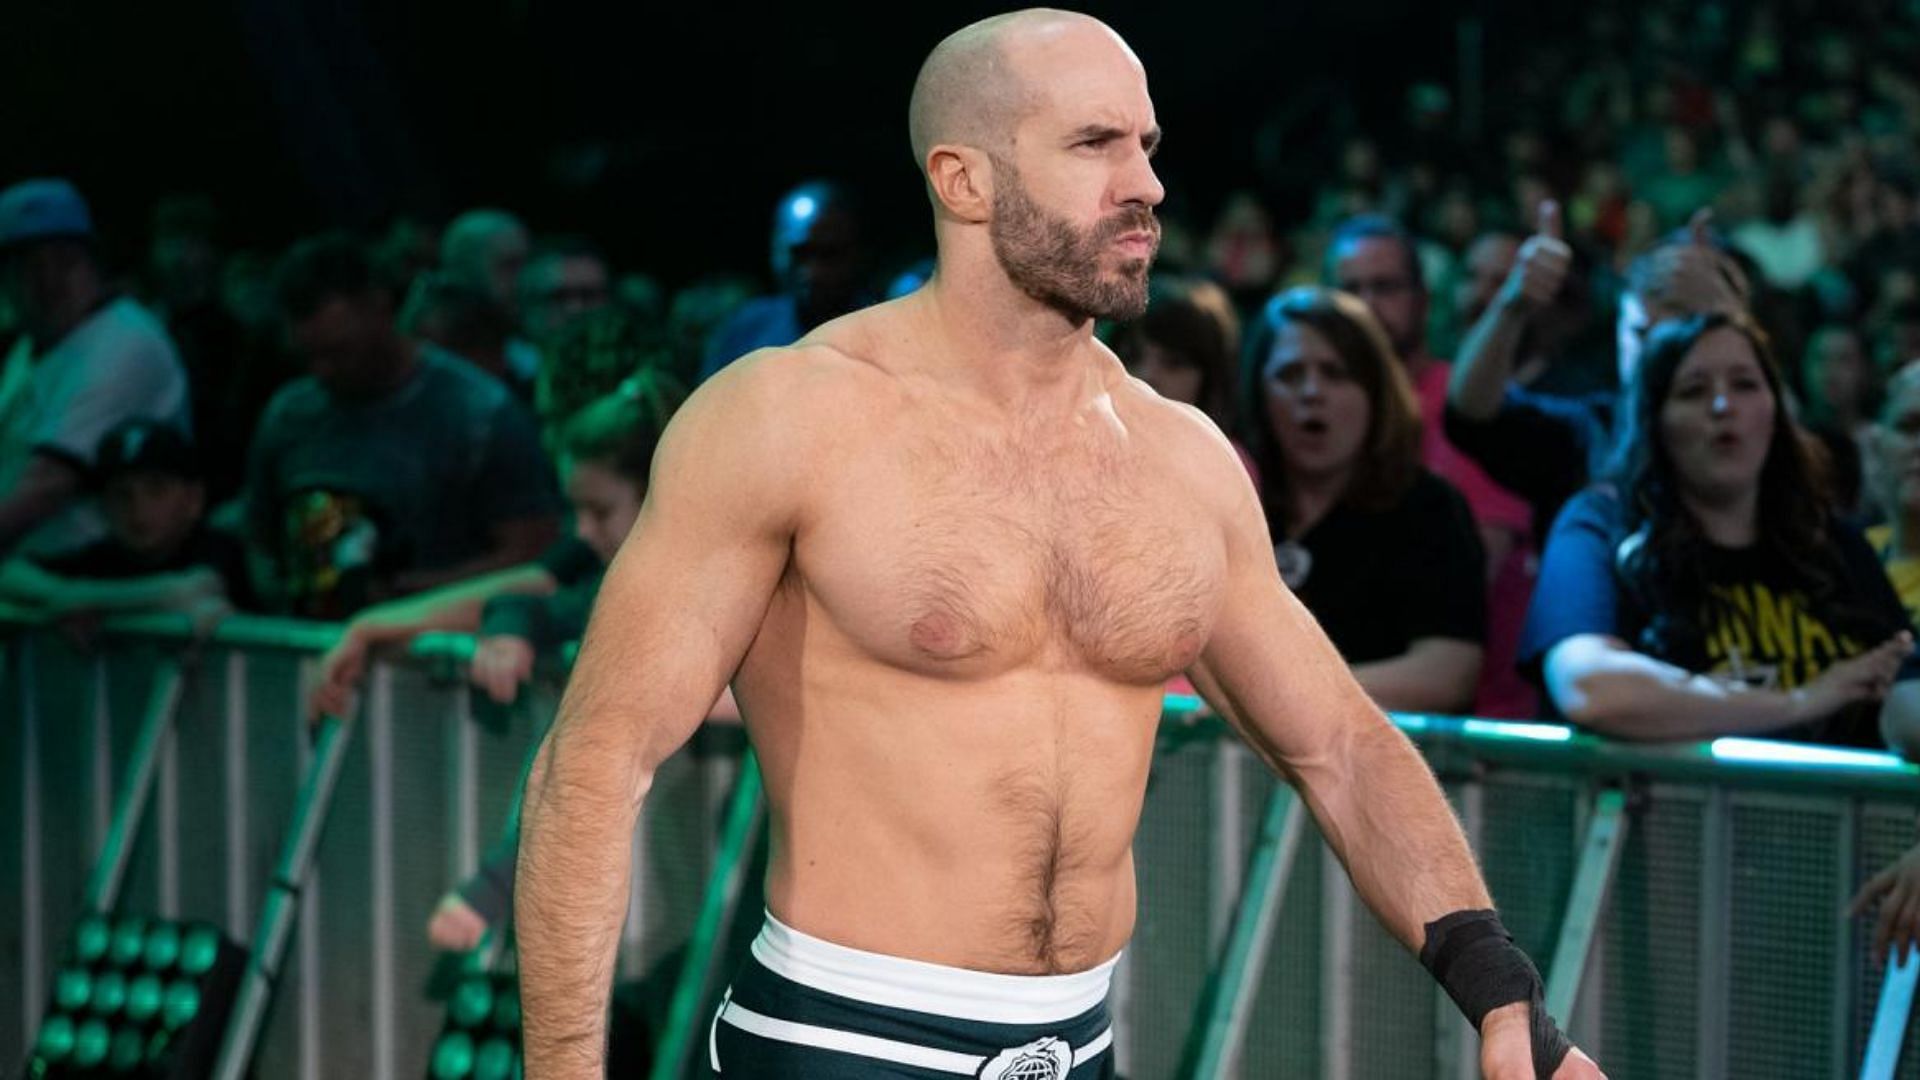 Cesaro departed WWE earlier this year after his contract expired